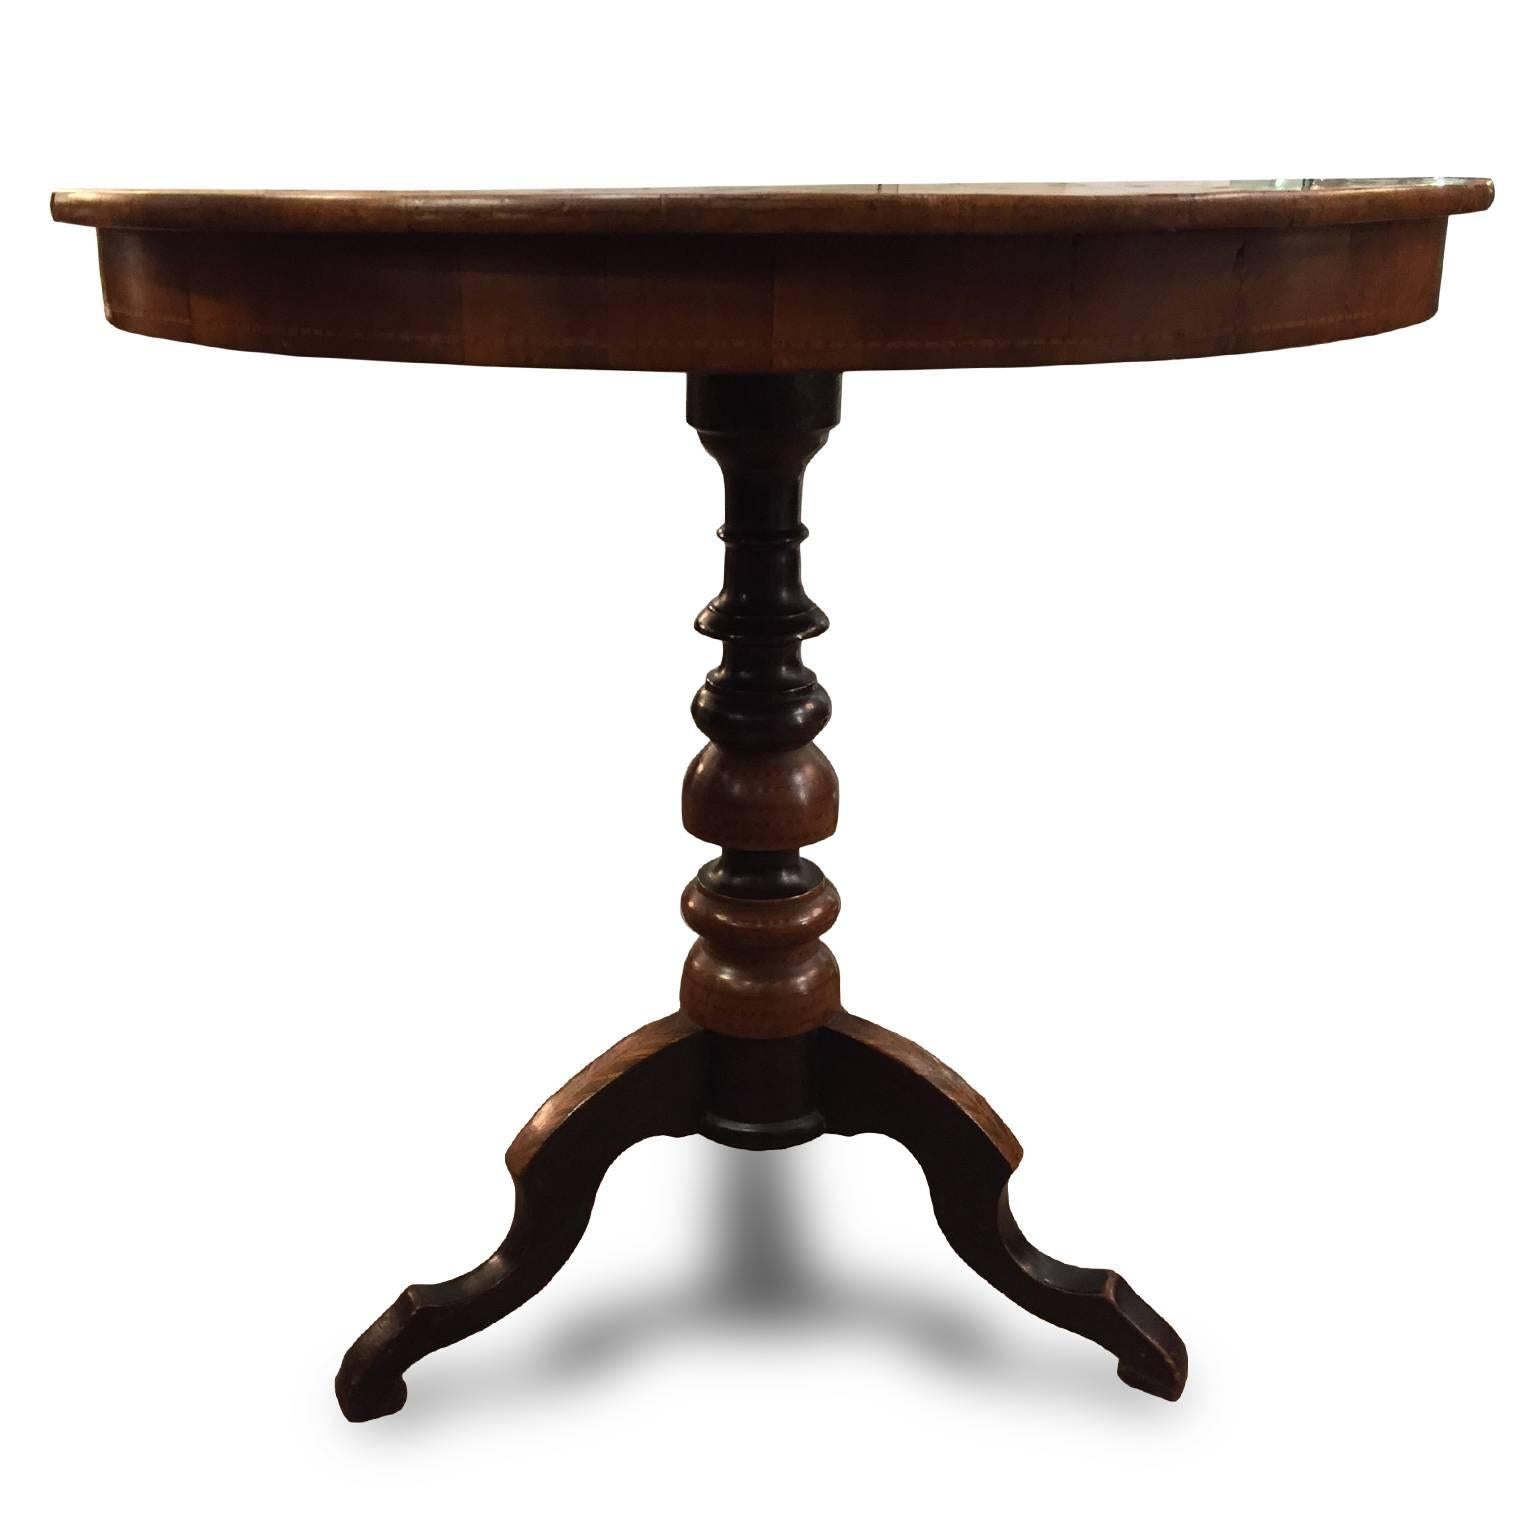 Cherry Mid-19th Century Italian Marquetry Circular Centre Table from Rolo